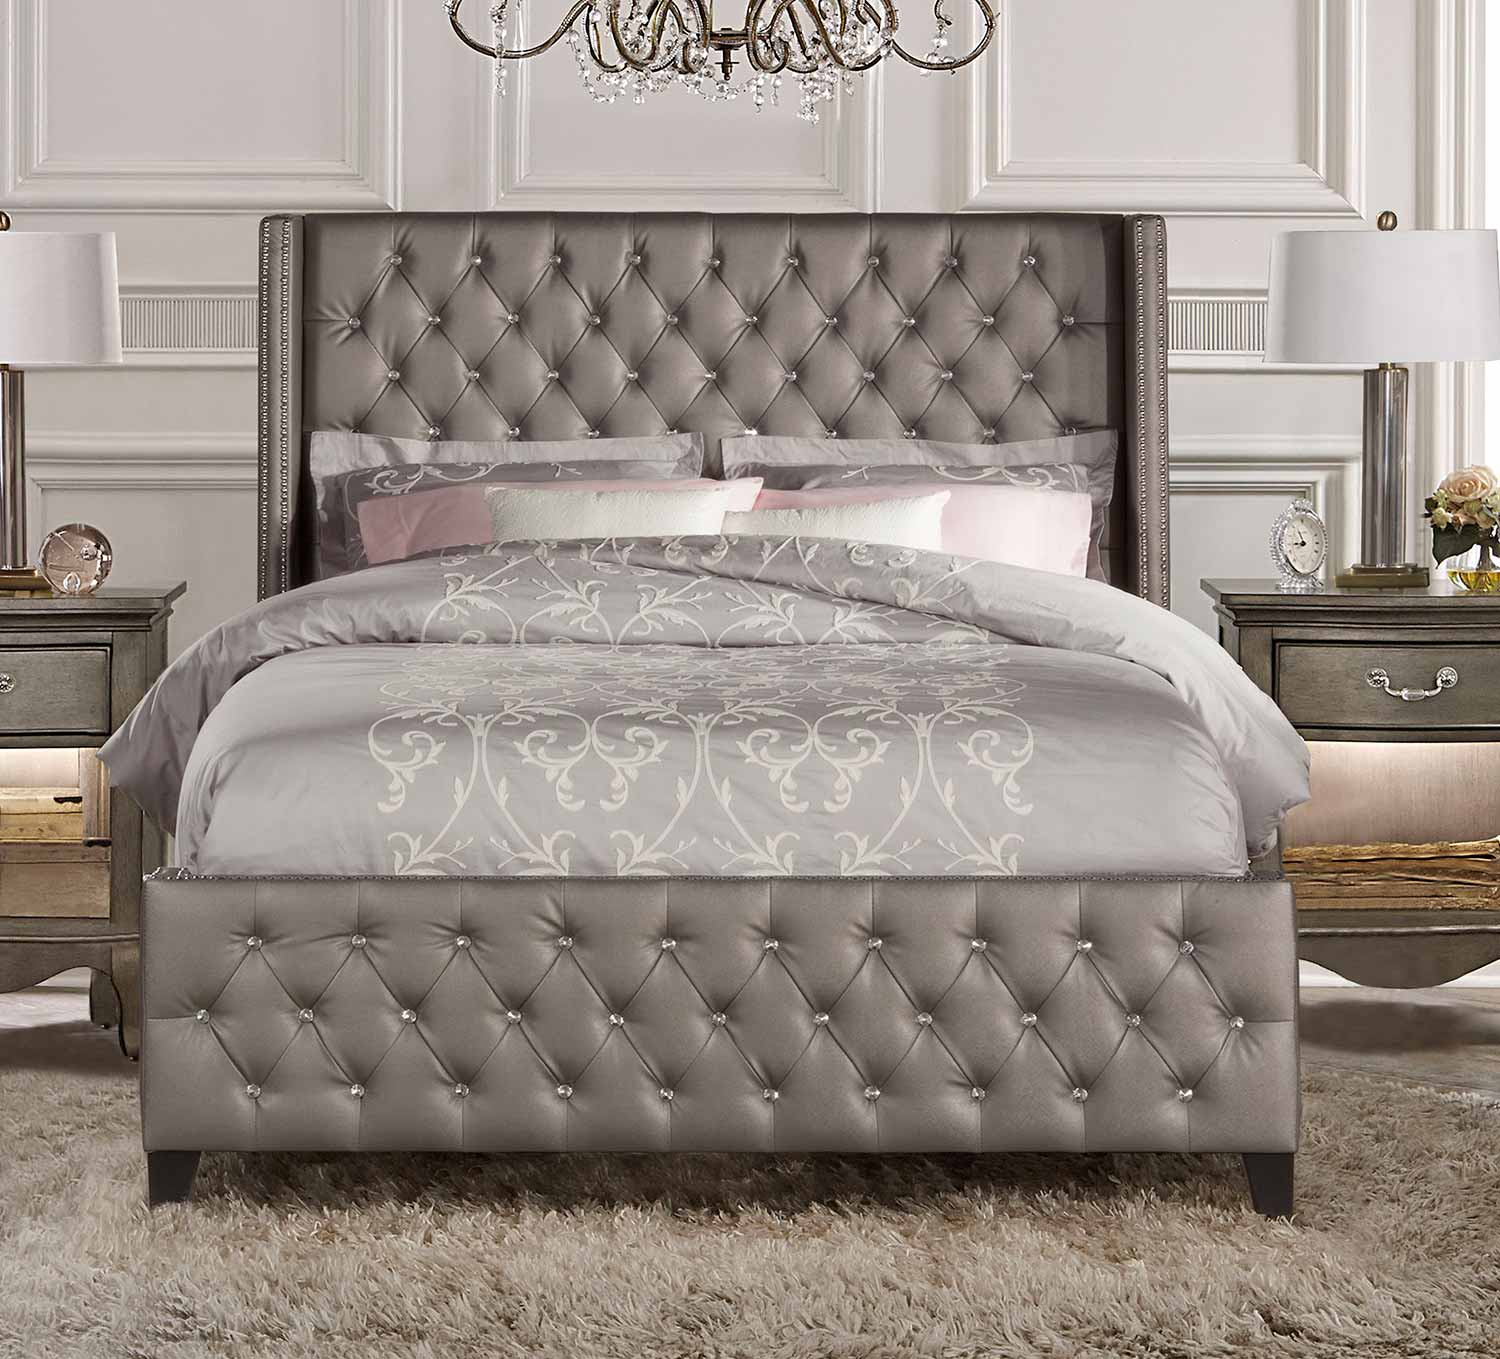 Hillsdale Memphis Bed - Diva/Textured Pewter Faux Leather